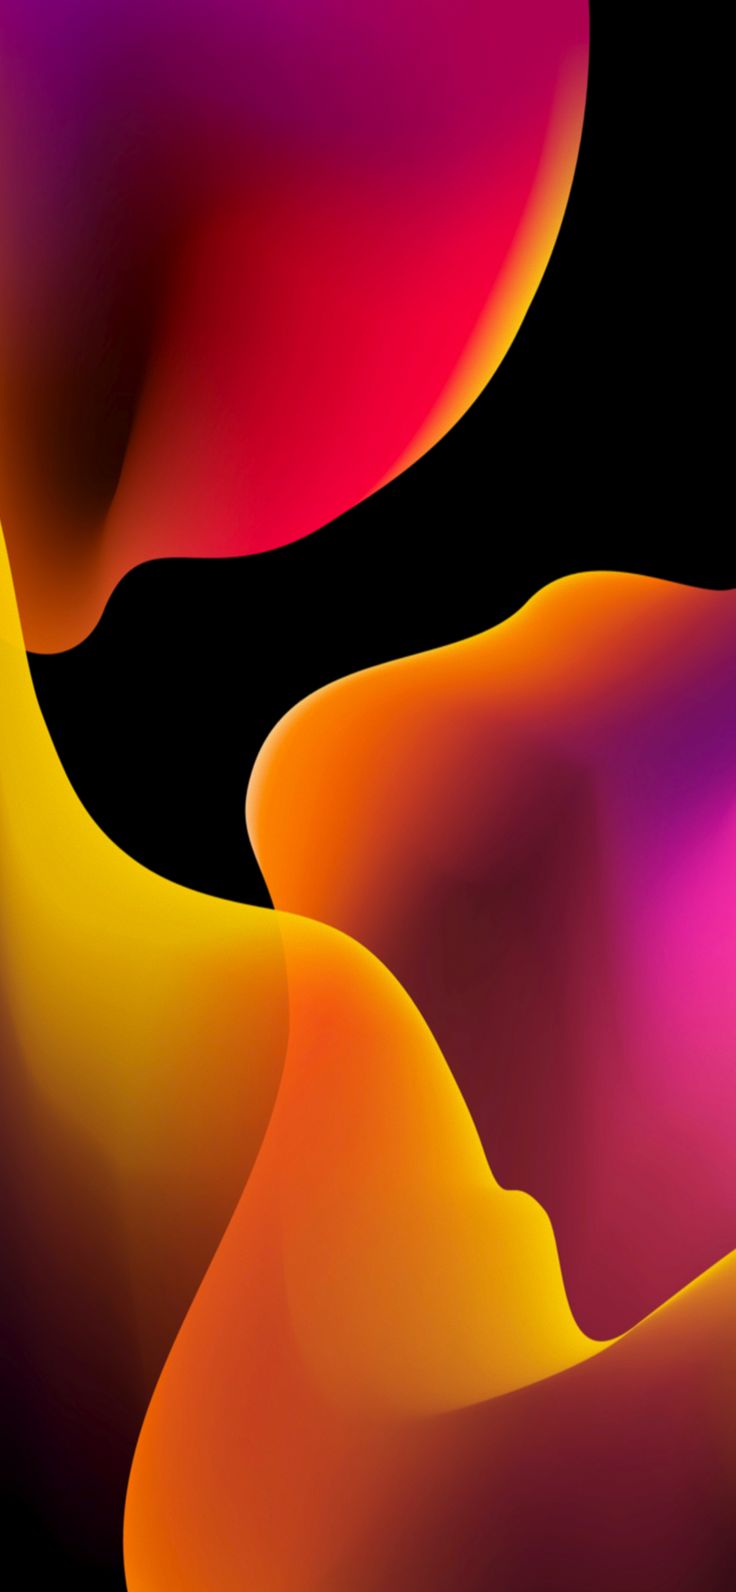 iOS Style Waves Central. Wallpaper image hd, Wallpaper iphone christmas, iPhone background wallpaper